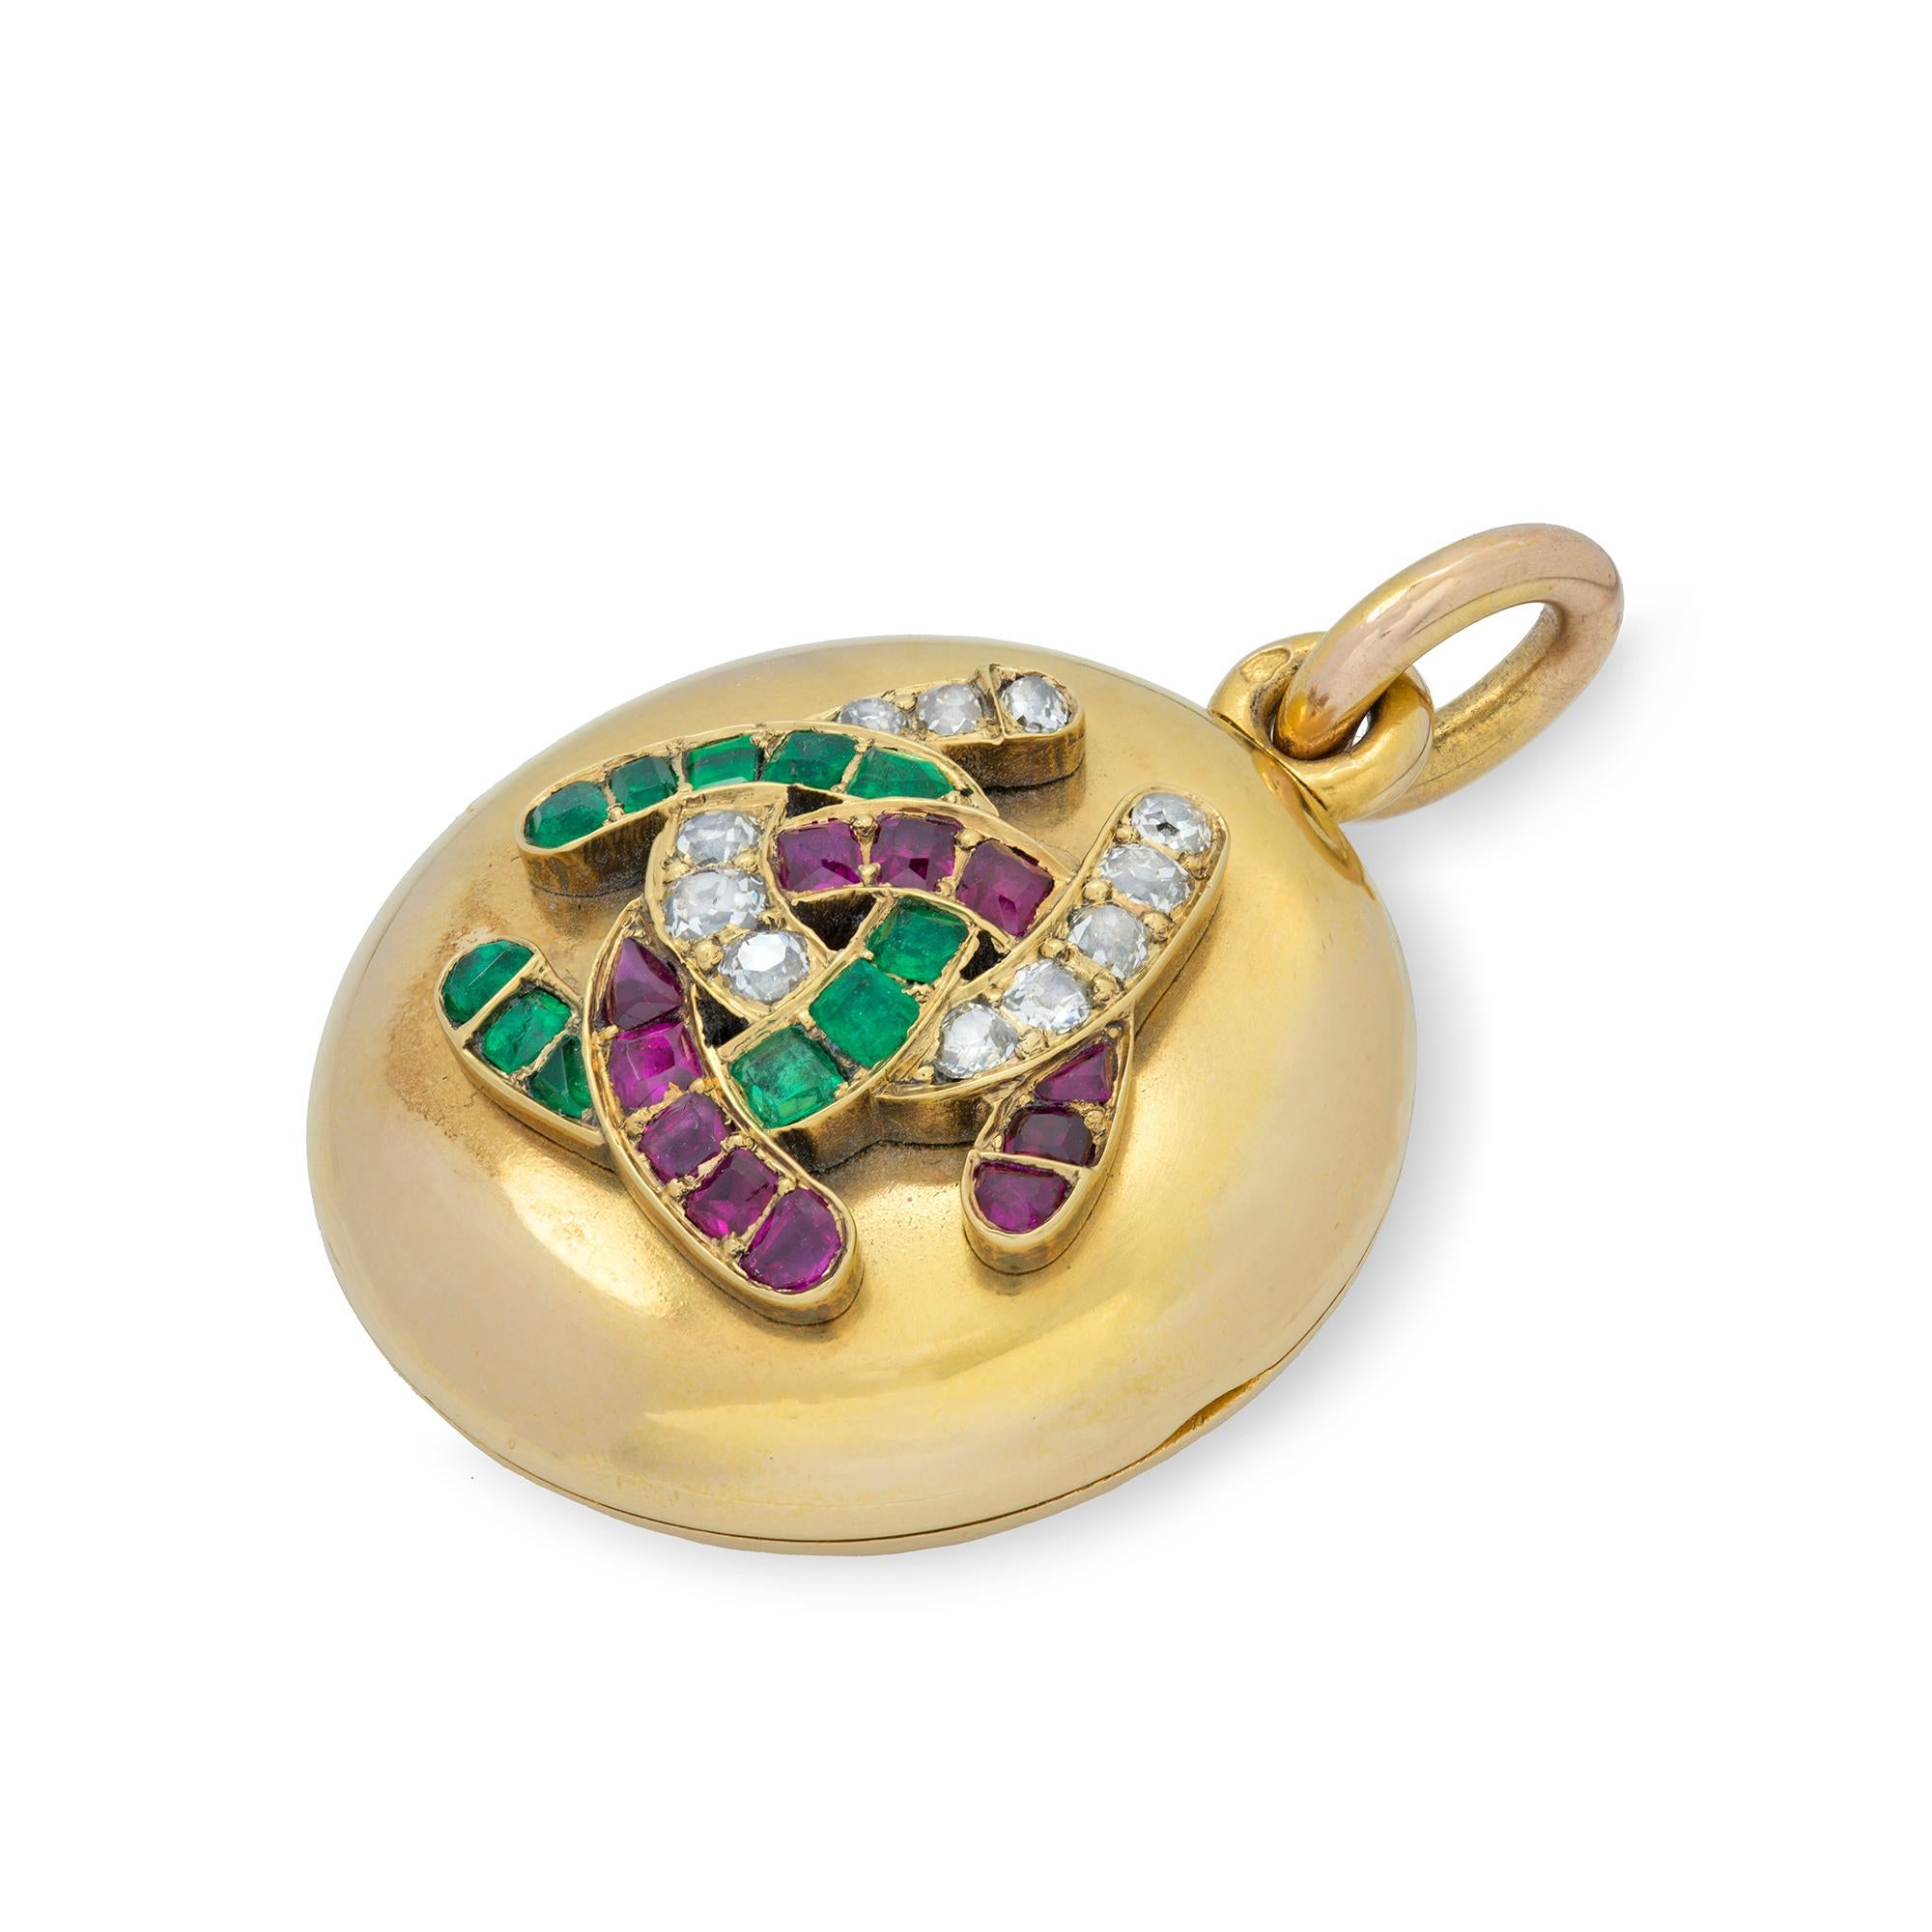 A French mid nineteenth century gold, ruby, emerald and diamond locket, the round satin-finish yellow gold locket set to the front with a motif of three interlocked horseshoes, one of emeralds, one of rubies, the other of diamonds, the locket